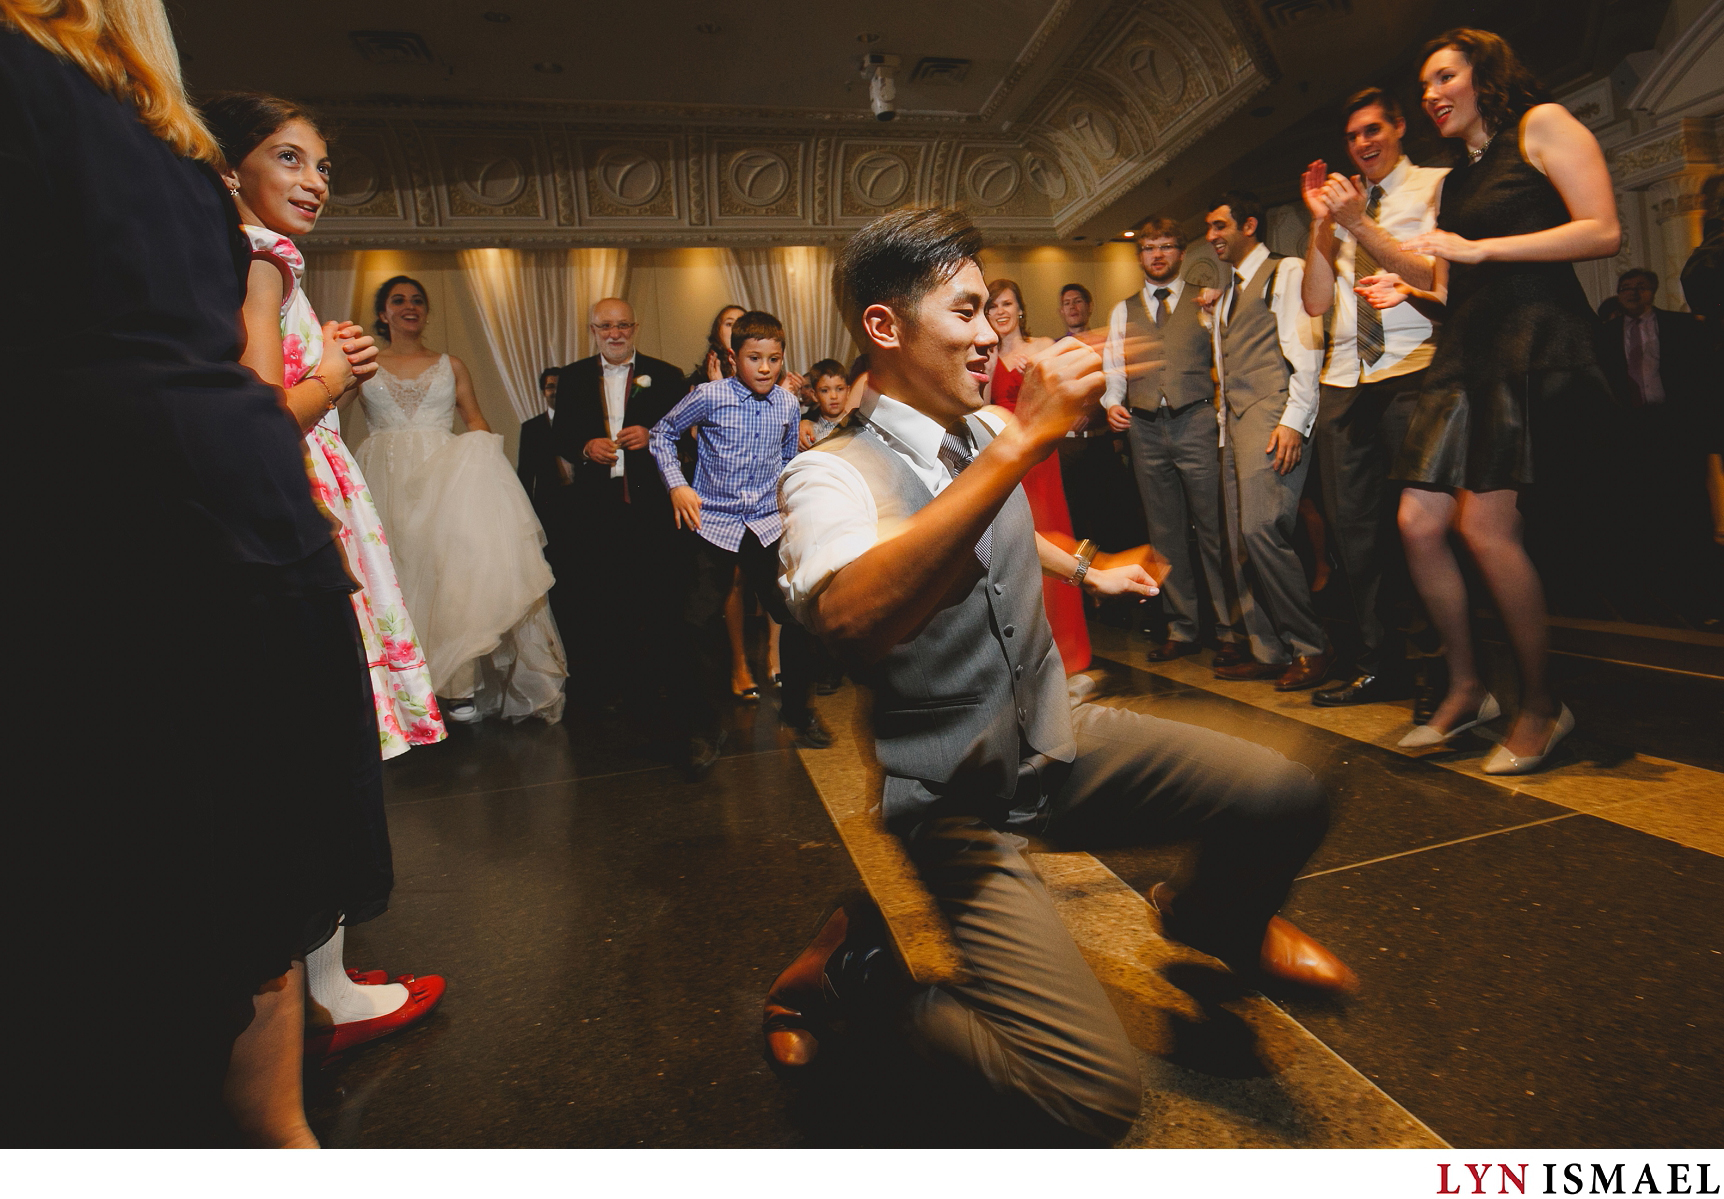 Vaughan wedding photojournalist captured a groomsman dancing at a wedding reception in Paradise Banquet Hall.